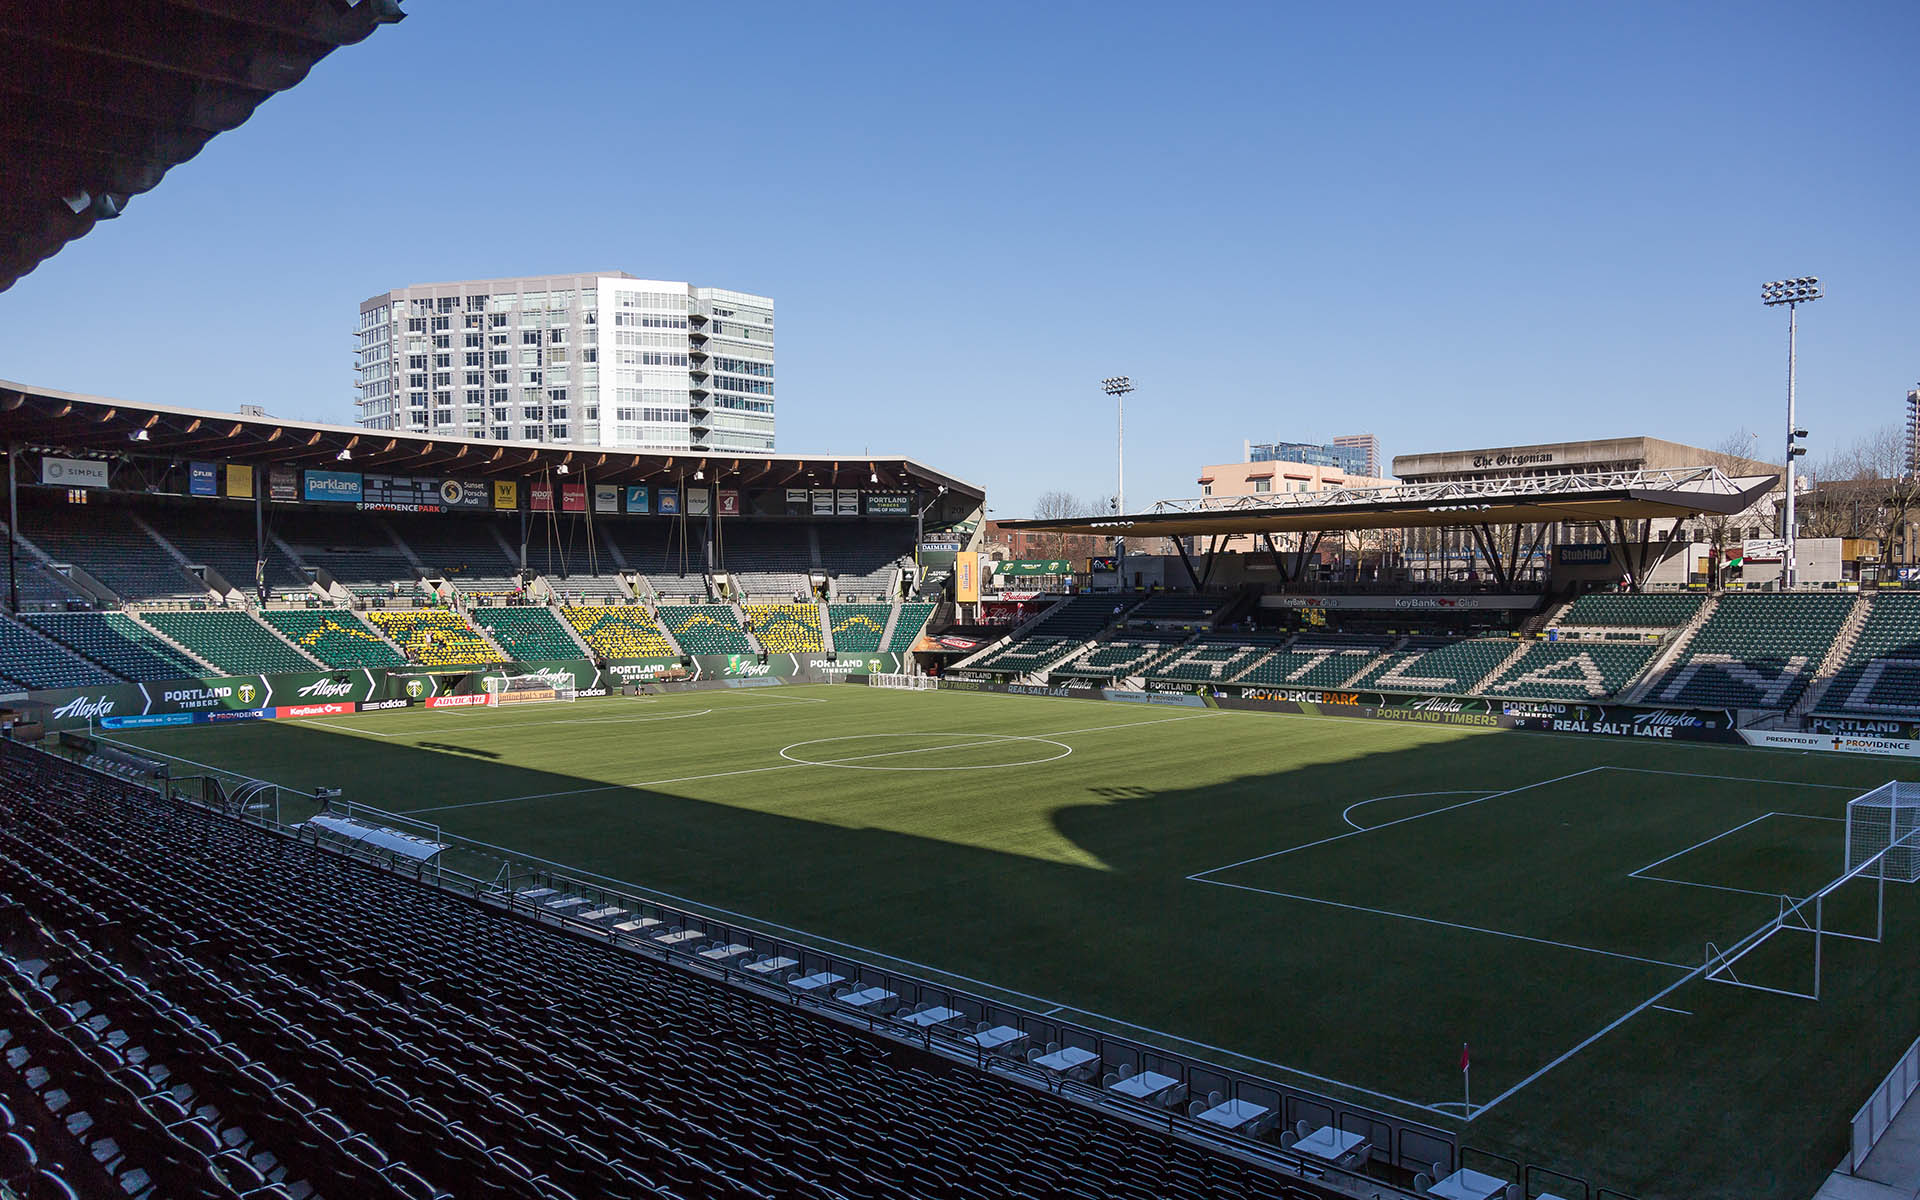 exciting Sunday of Major League Soccer as the Portland Timbers Host LA Galaxy at Home